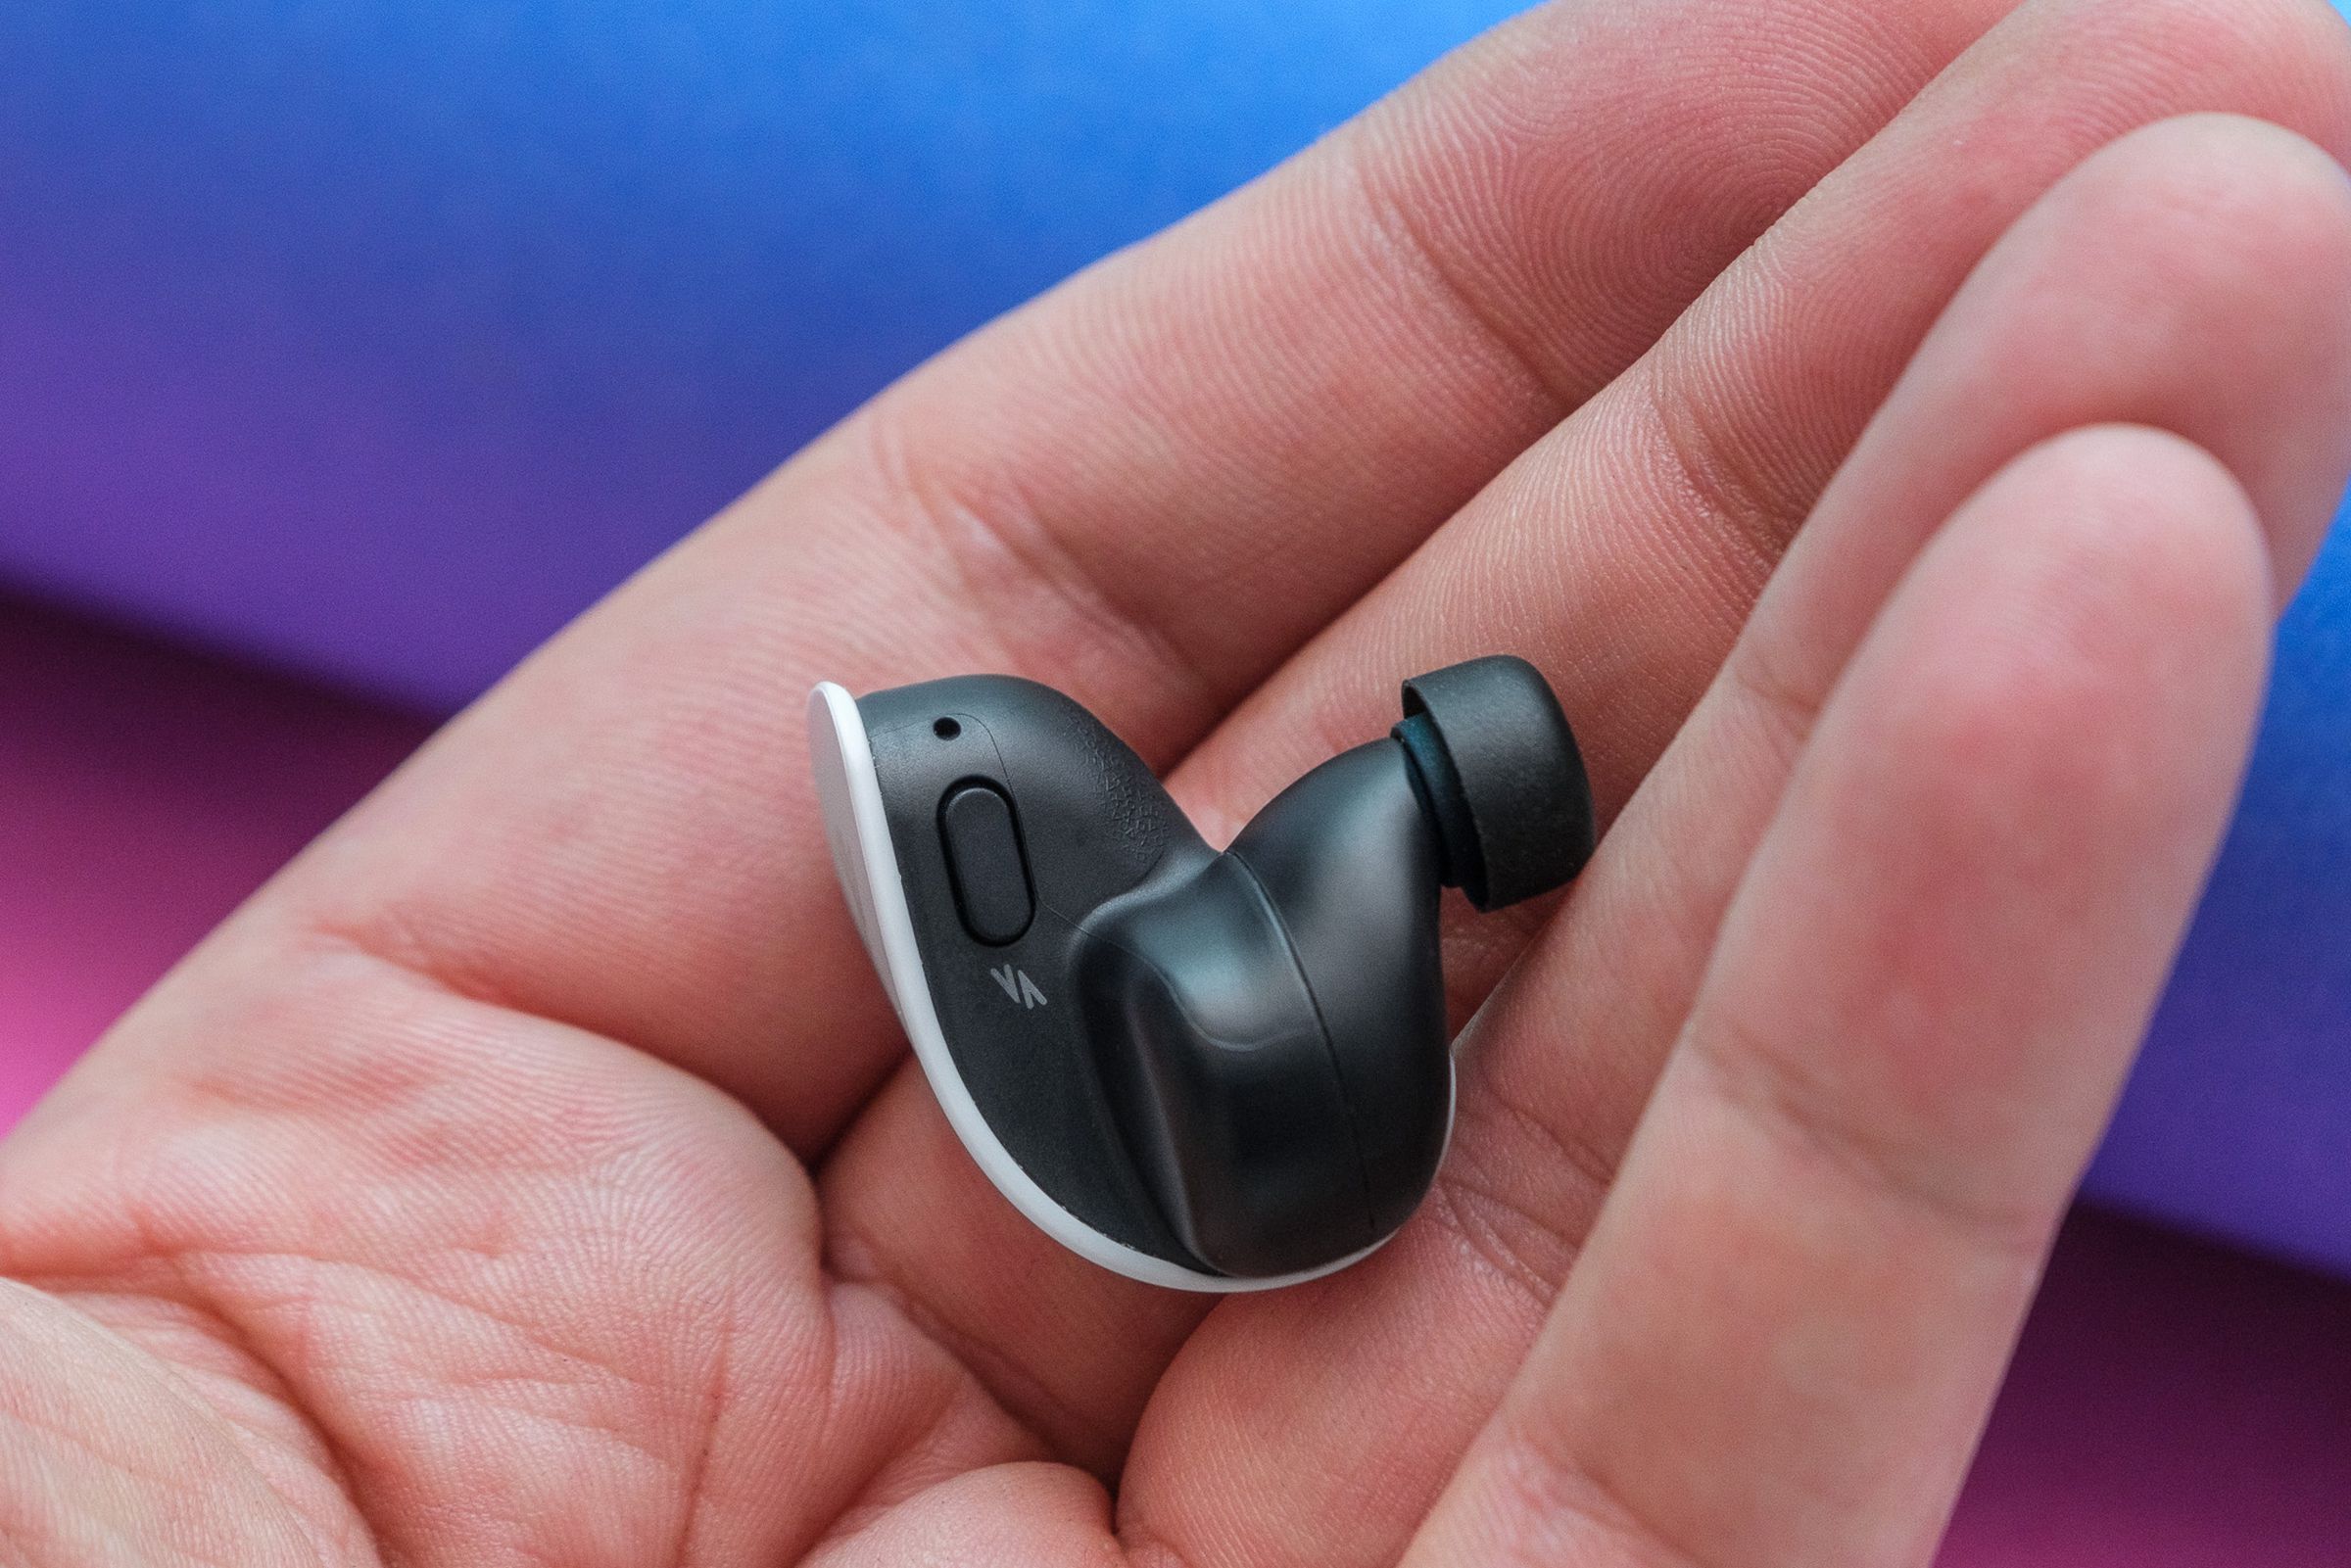 A photo of Sony’s Pulse Explore wireless earbuds.